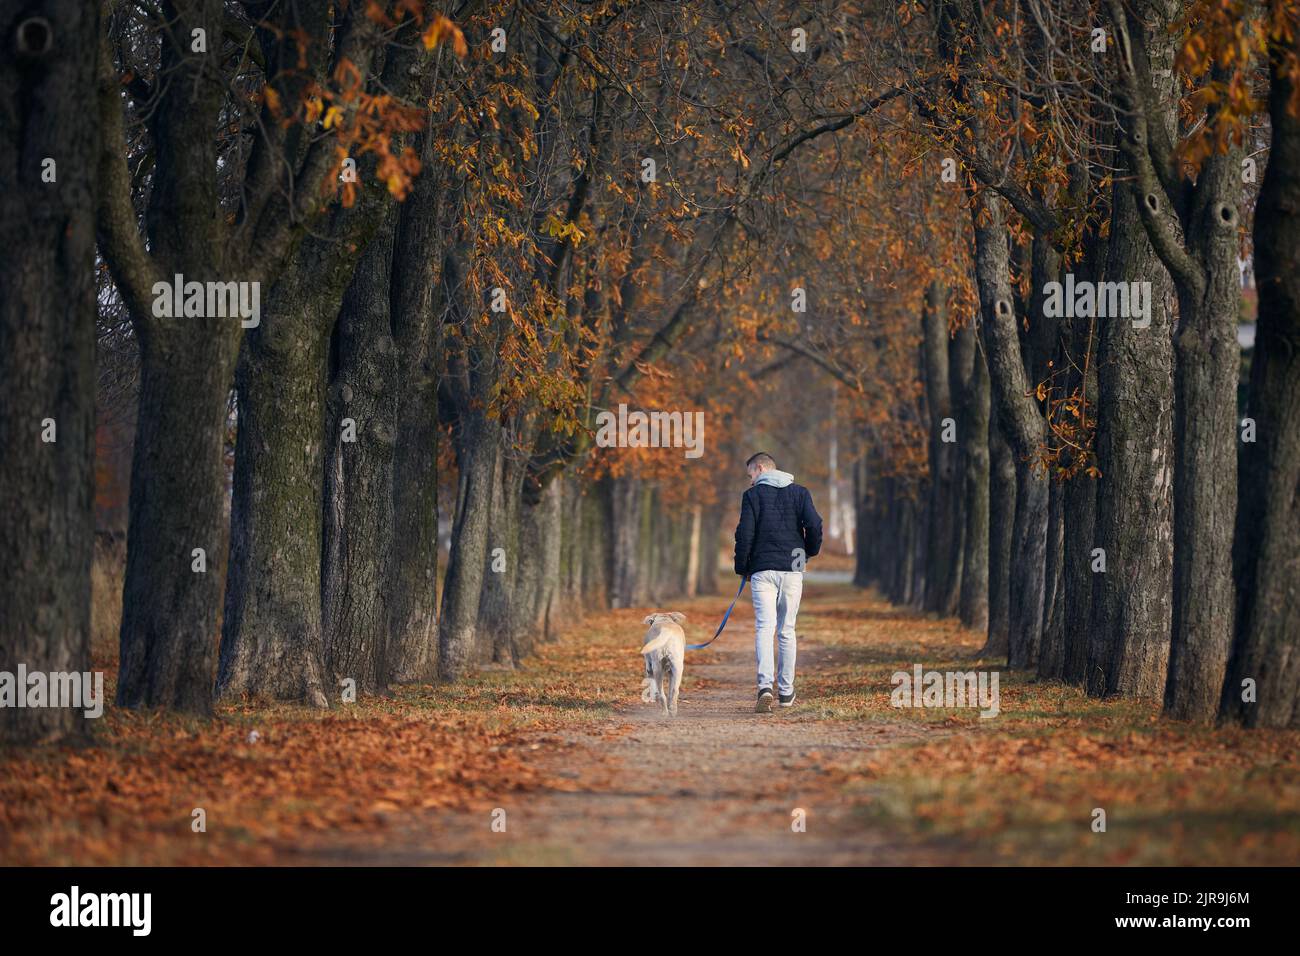 Rear view of man with dog. Pet owner walking with labrador retriever through chestnut alley during sunny autumn day. Stock Photo